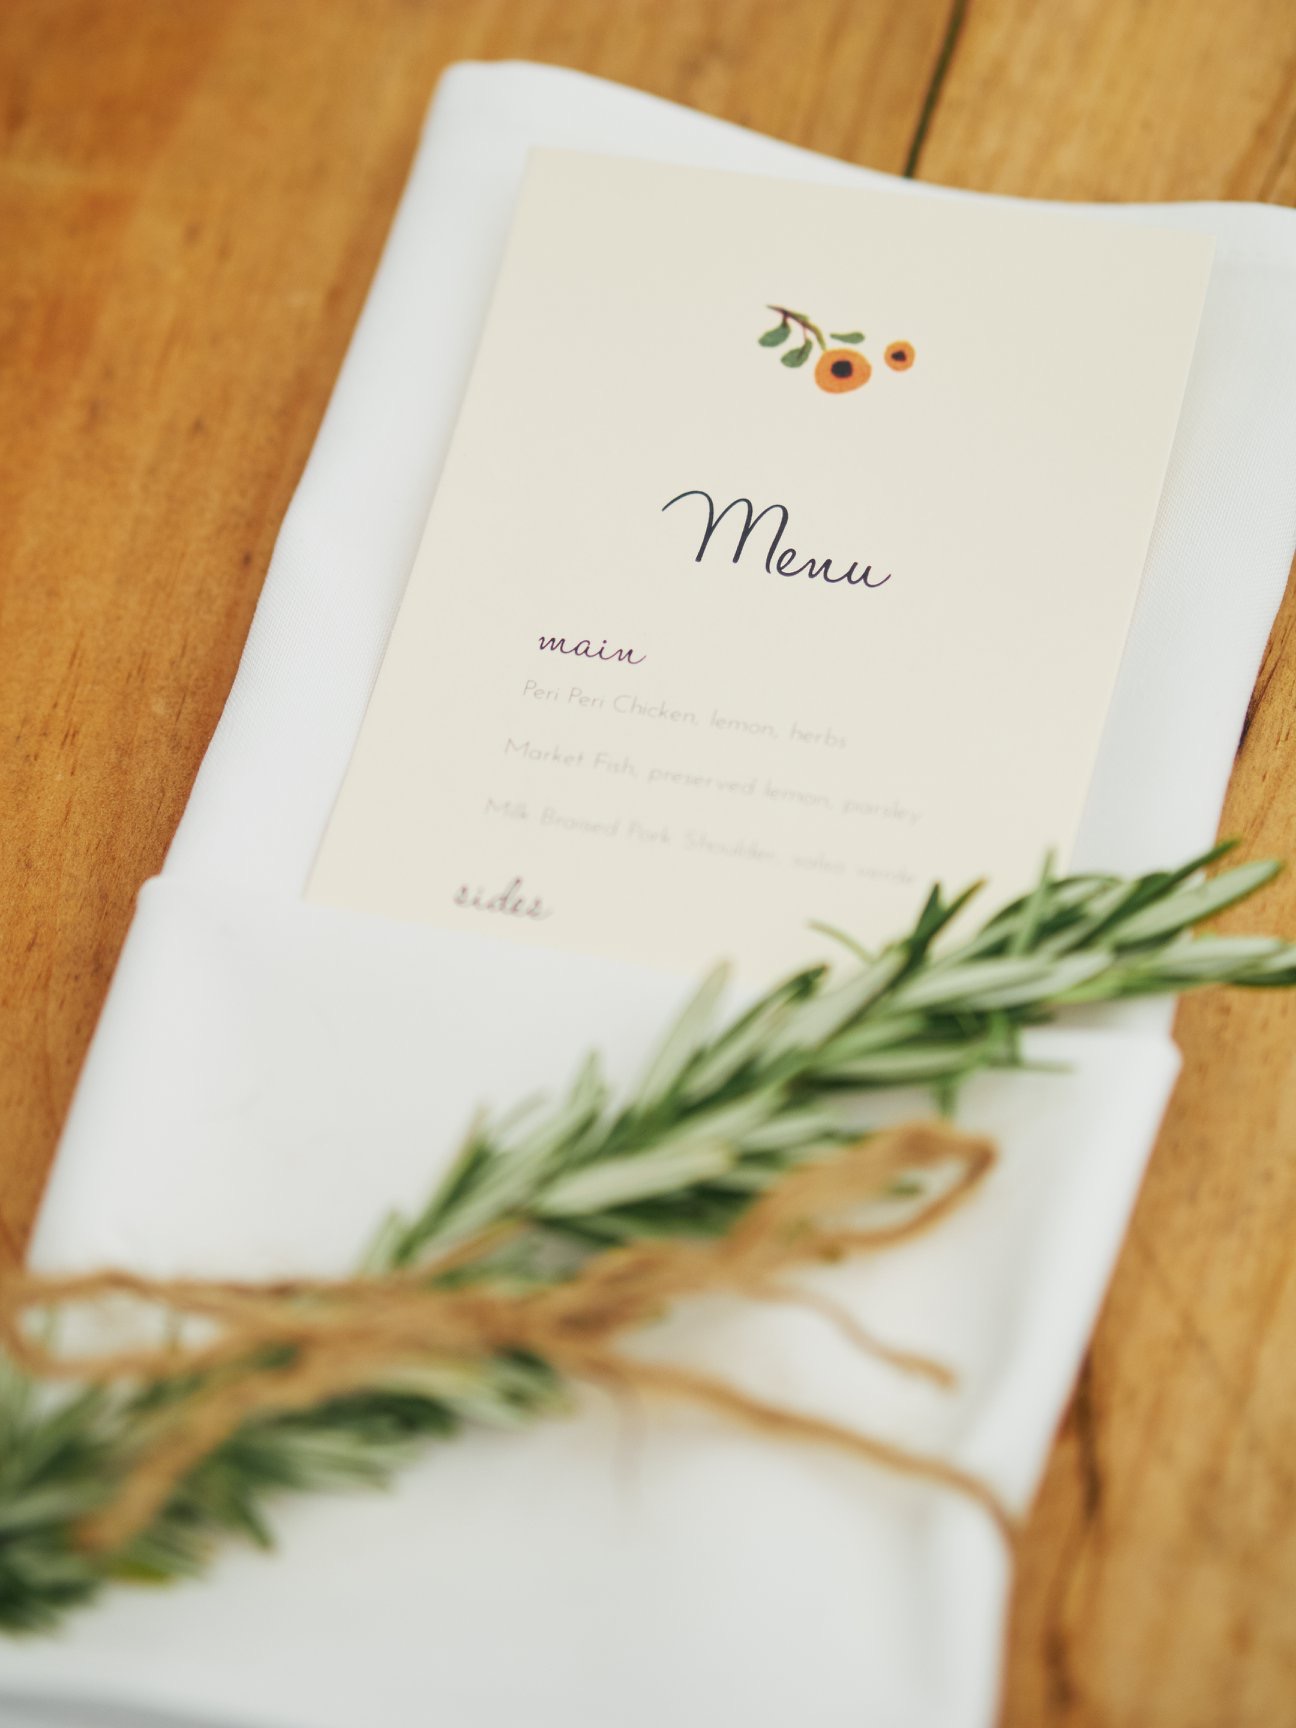 Wedding menu, napkins with a sprig of rosemary tied with hemp - Pearl Weddings & Events